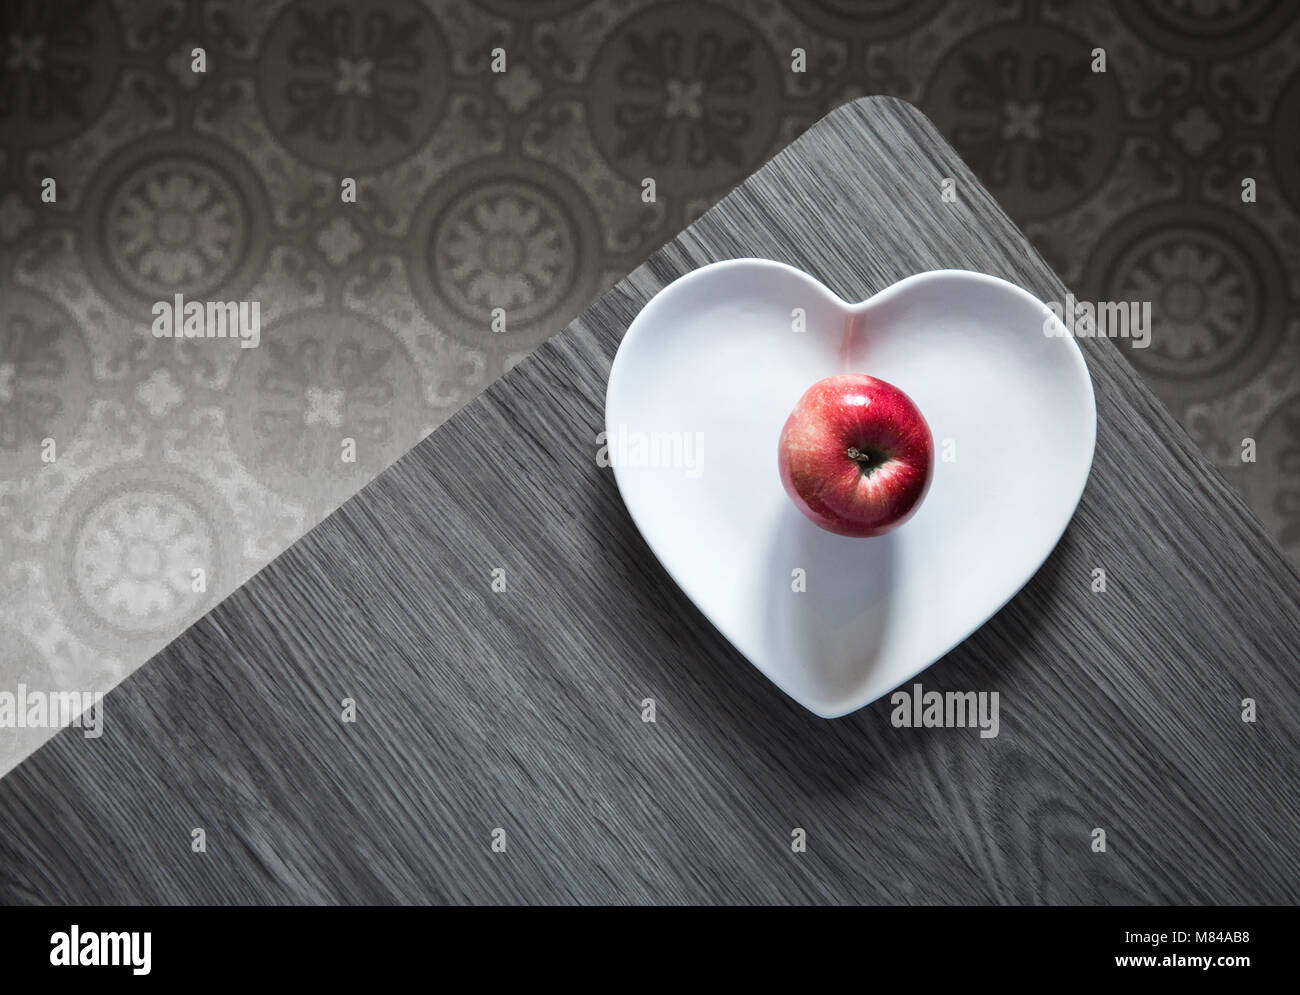 Looking down from above onto a table with a heart shaped plate and a colourful red apple in grey surroundings. Stock Photo